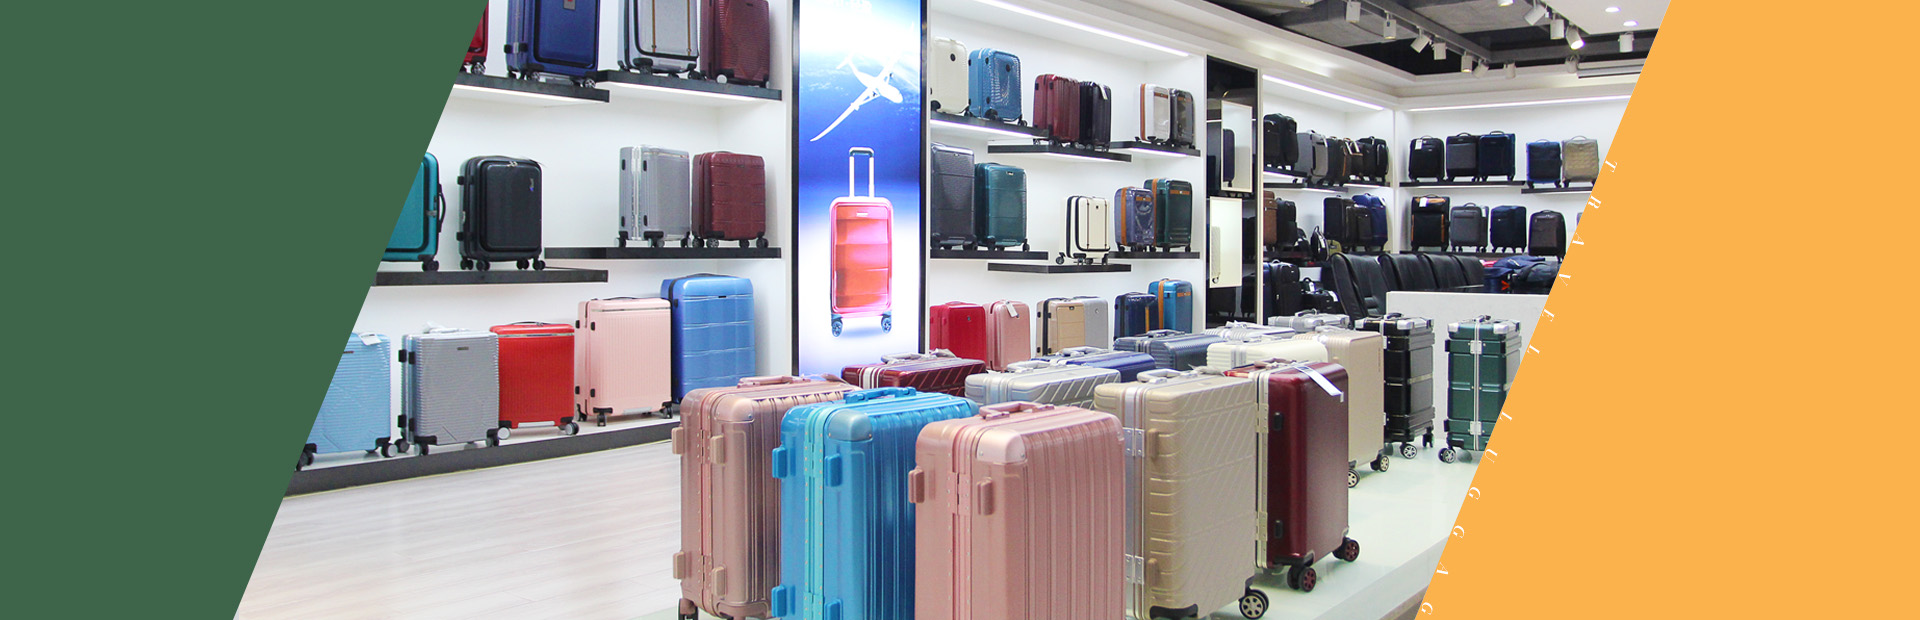 Binhao Luggage and Bags Factory03